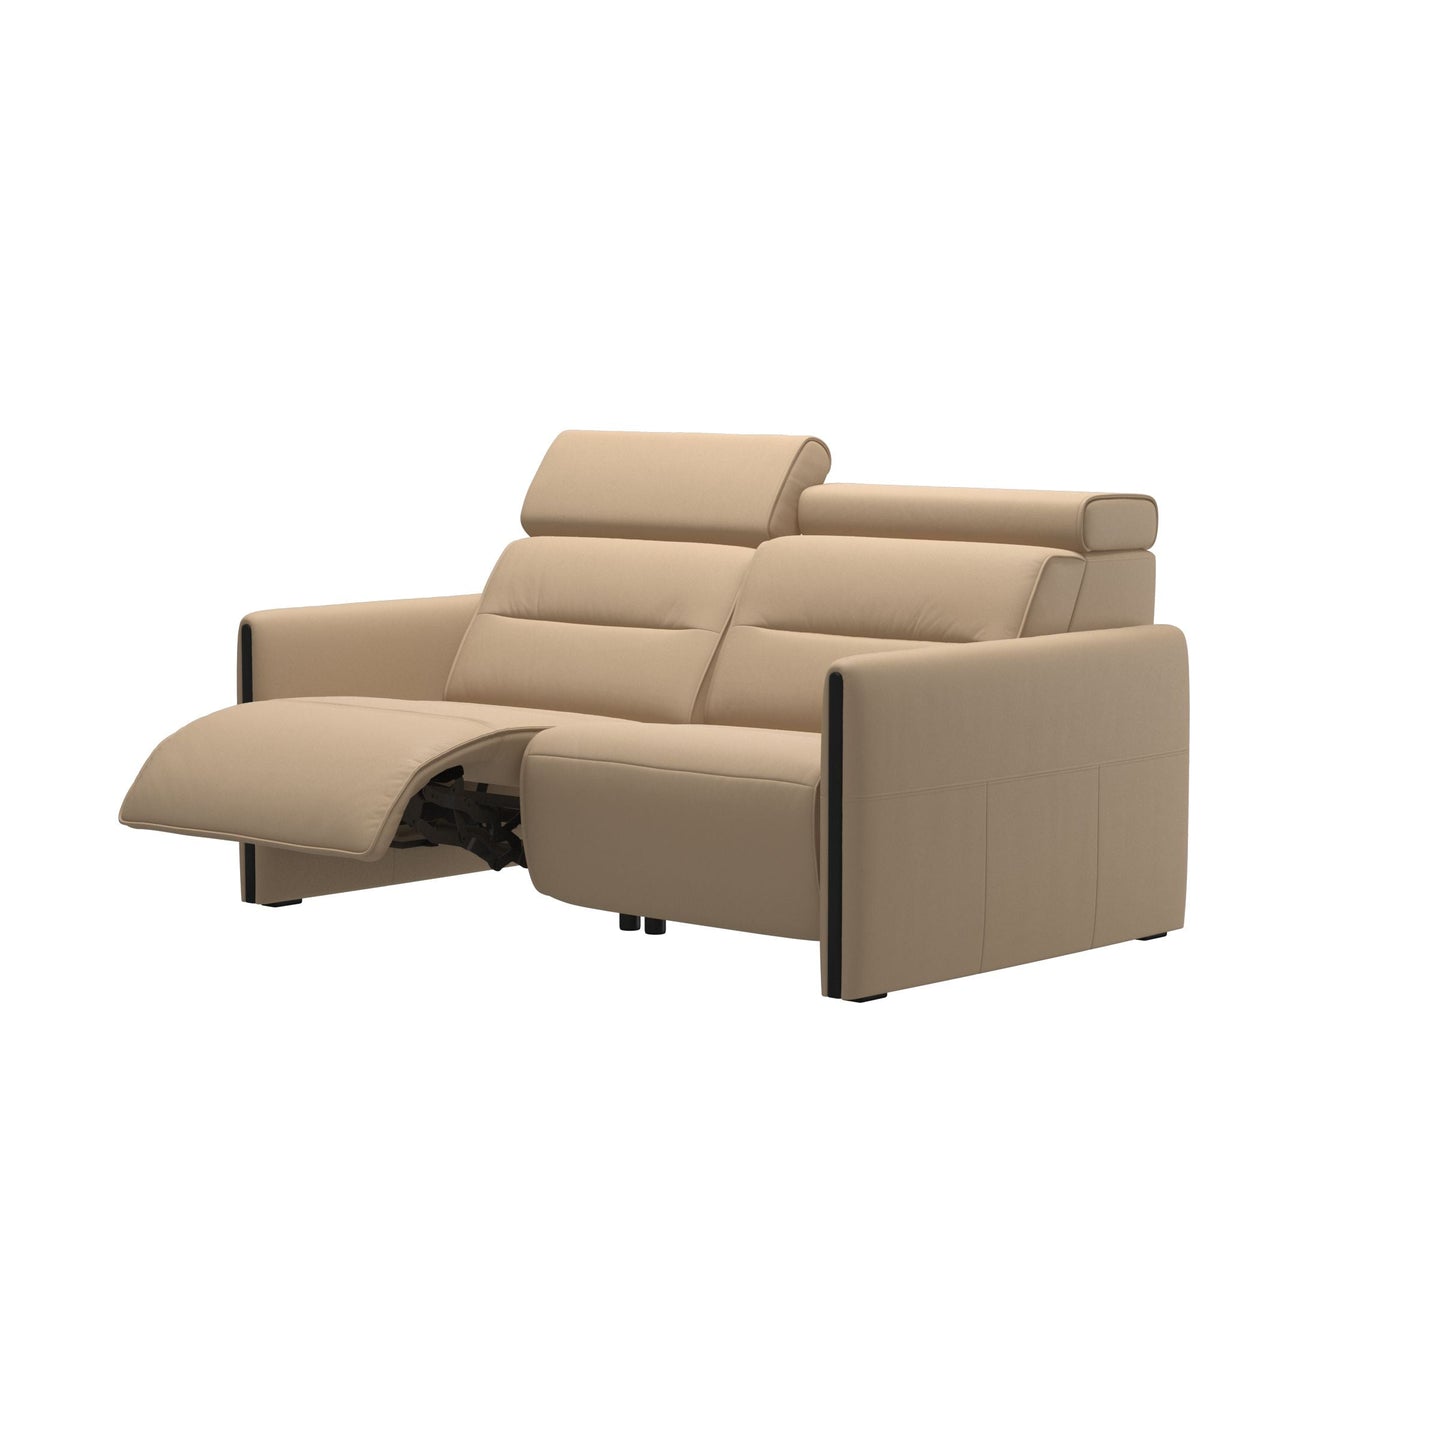 Stressless® Emily 2 seater with left motor arm wood